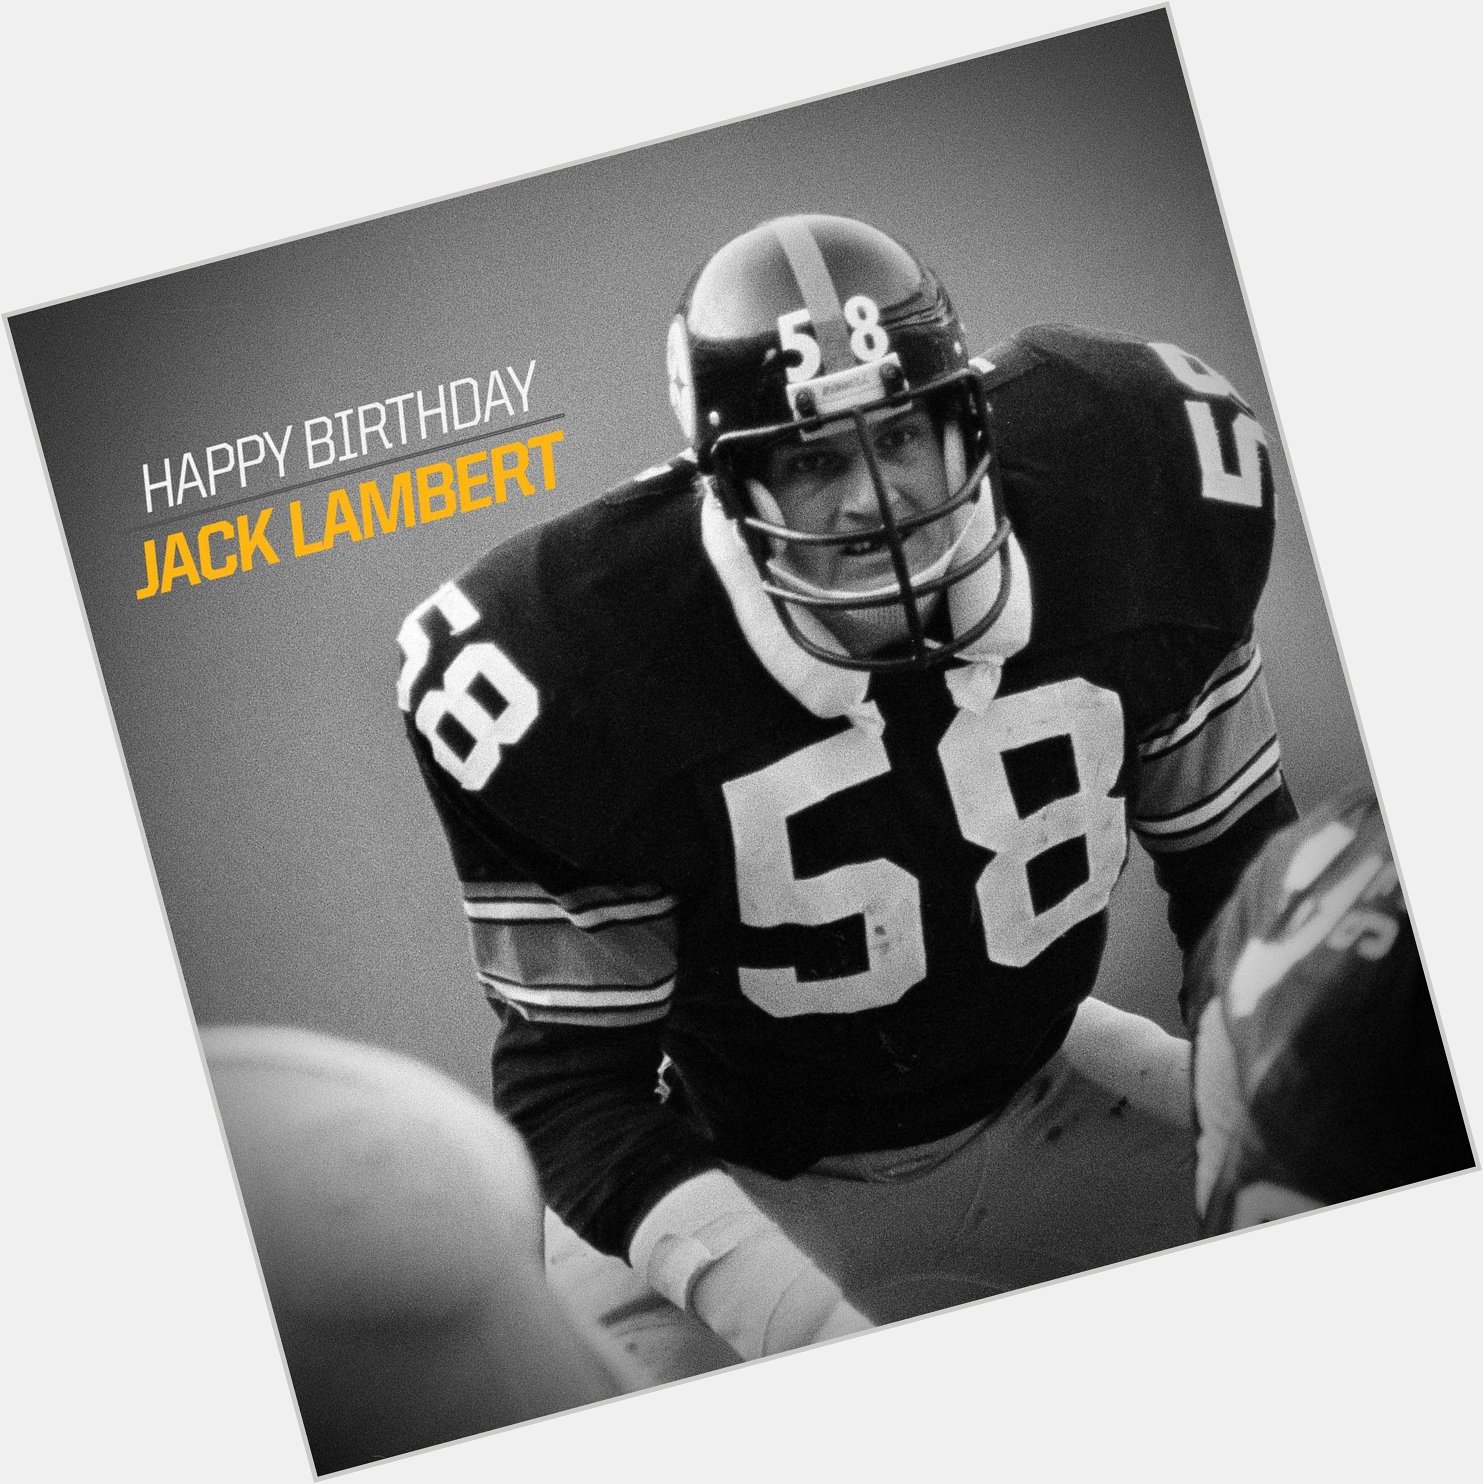 We would also like to wish great & er, Jack Lambert a Happy Birthday! 